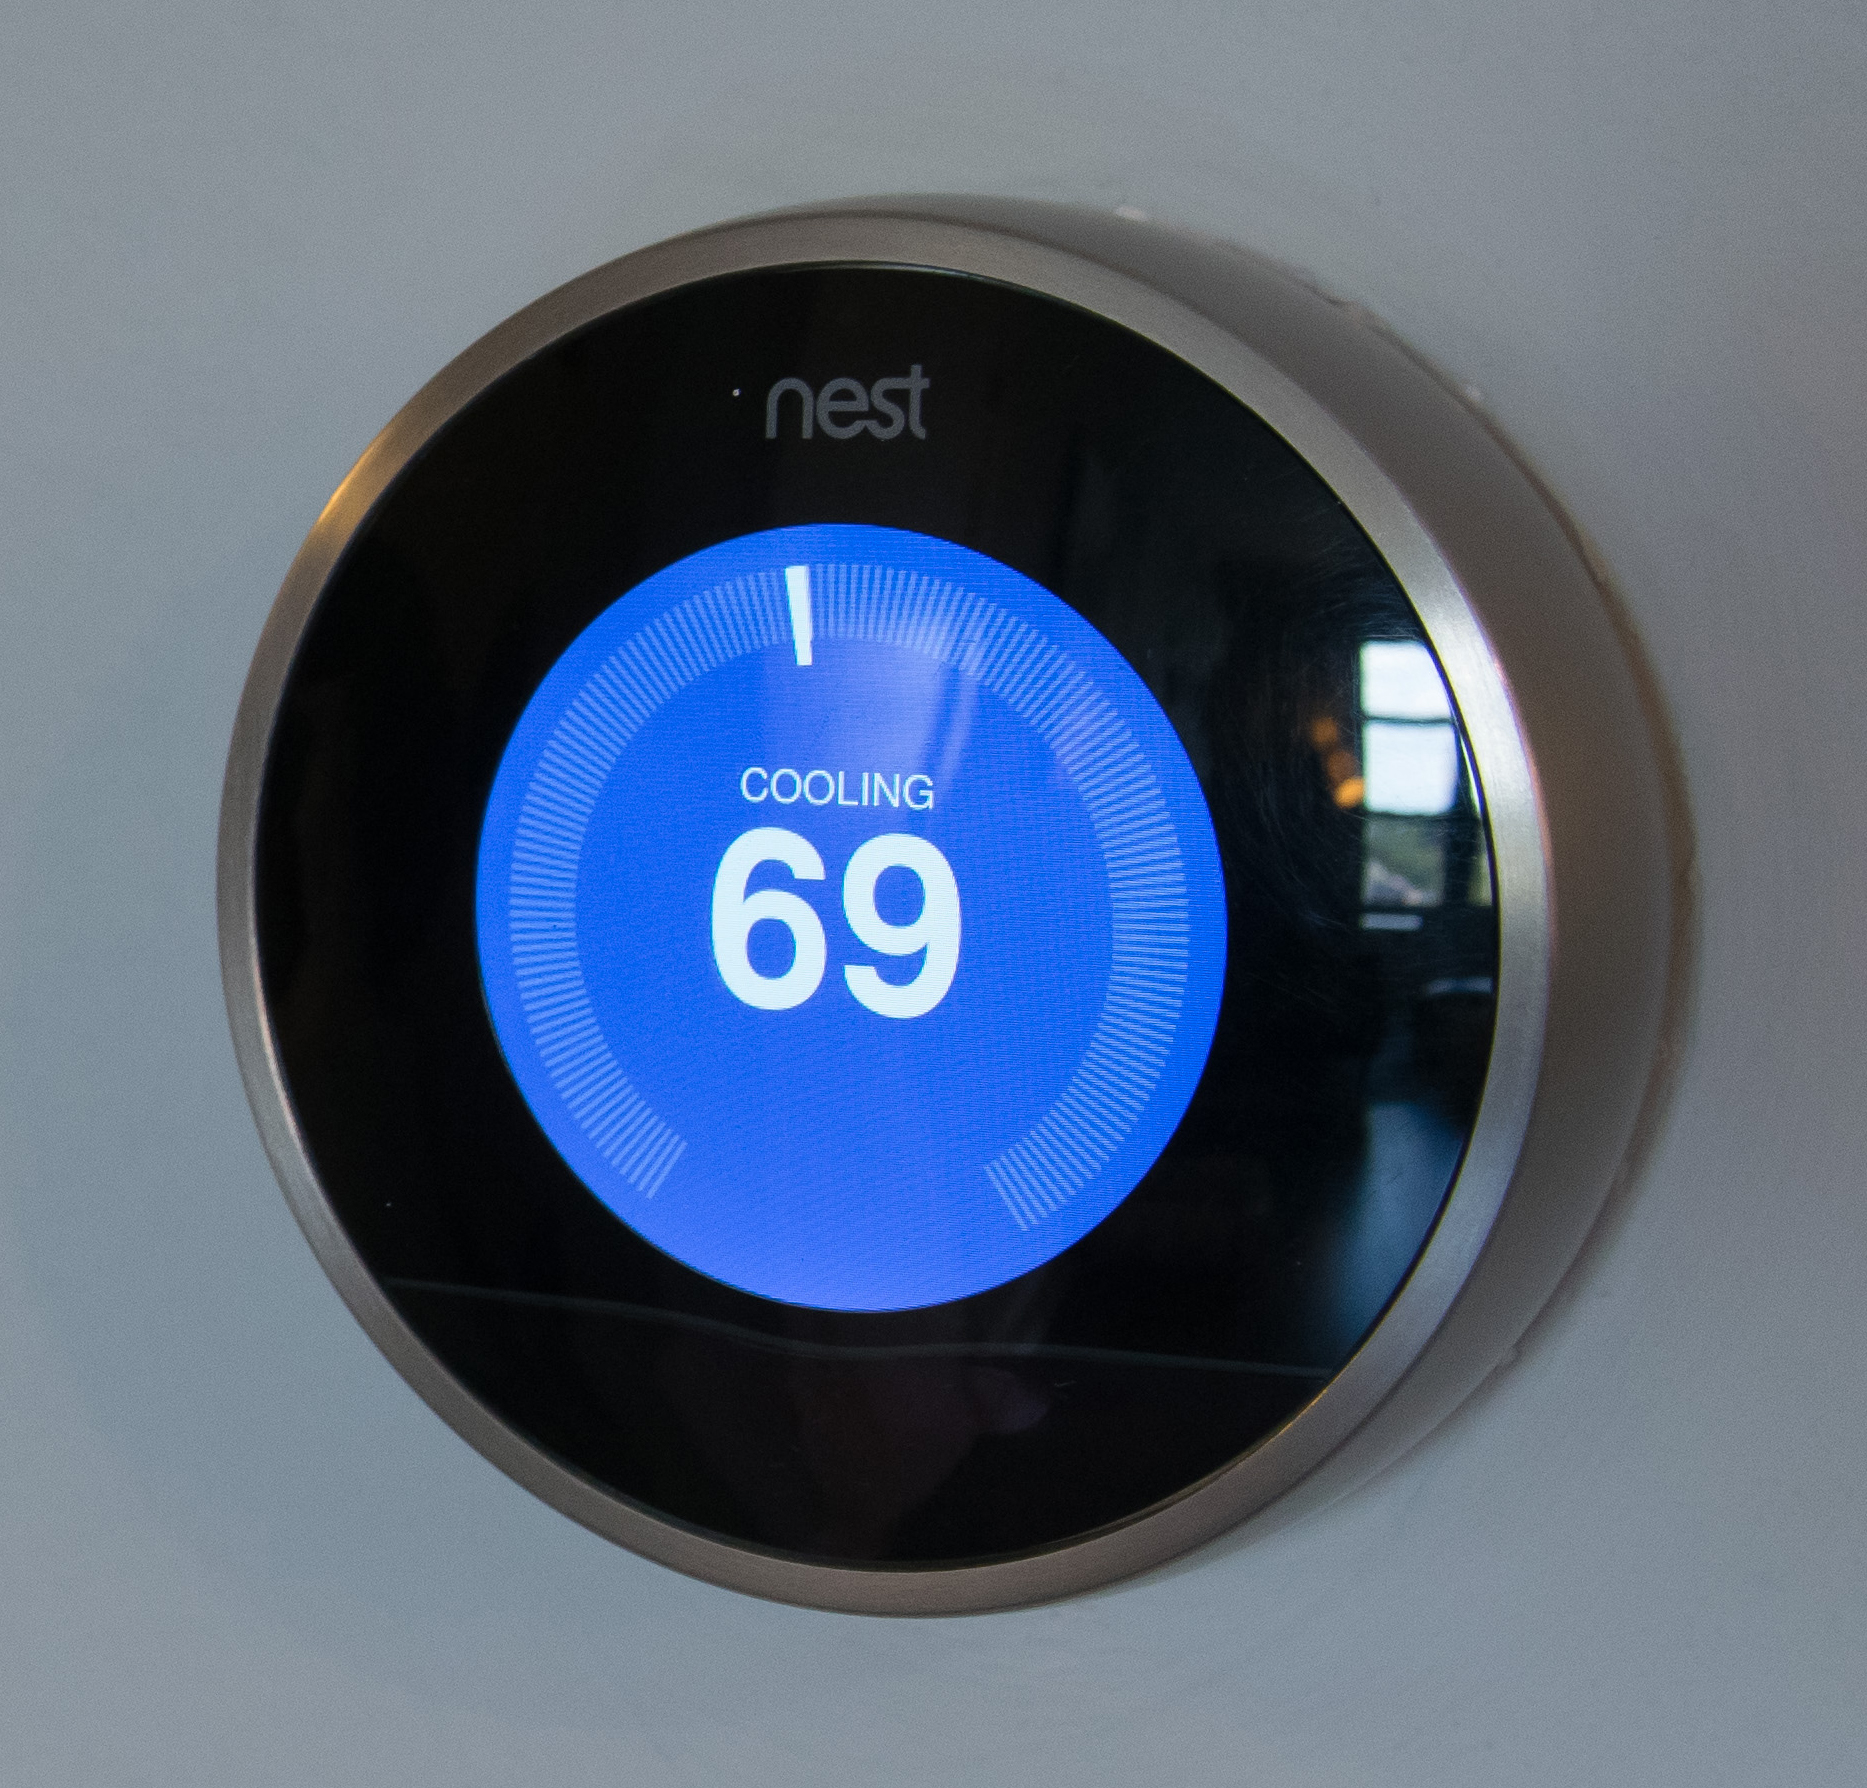 Hi-tech Nest learning thermostat